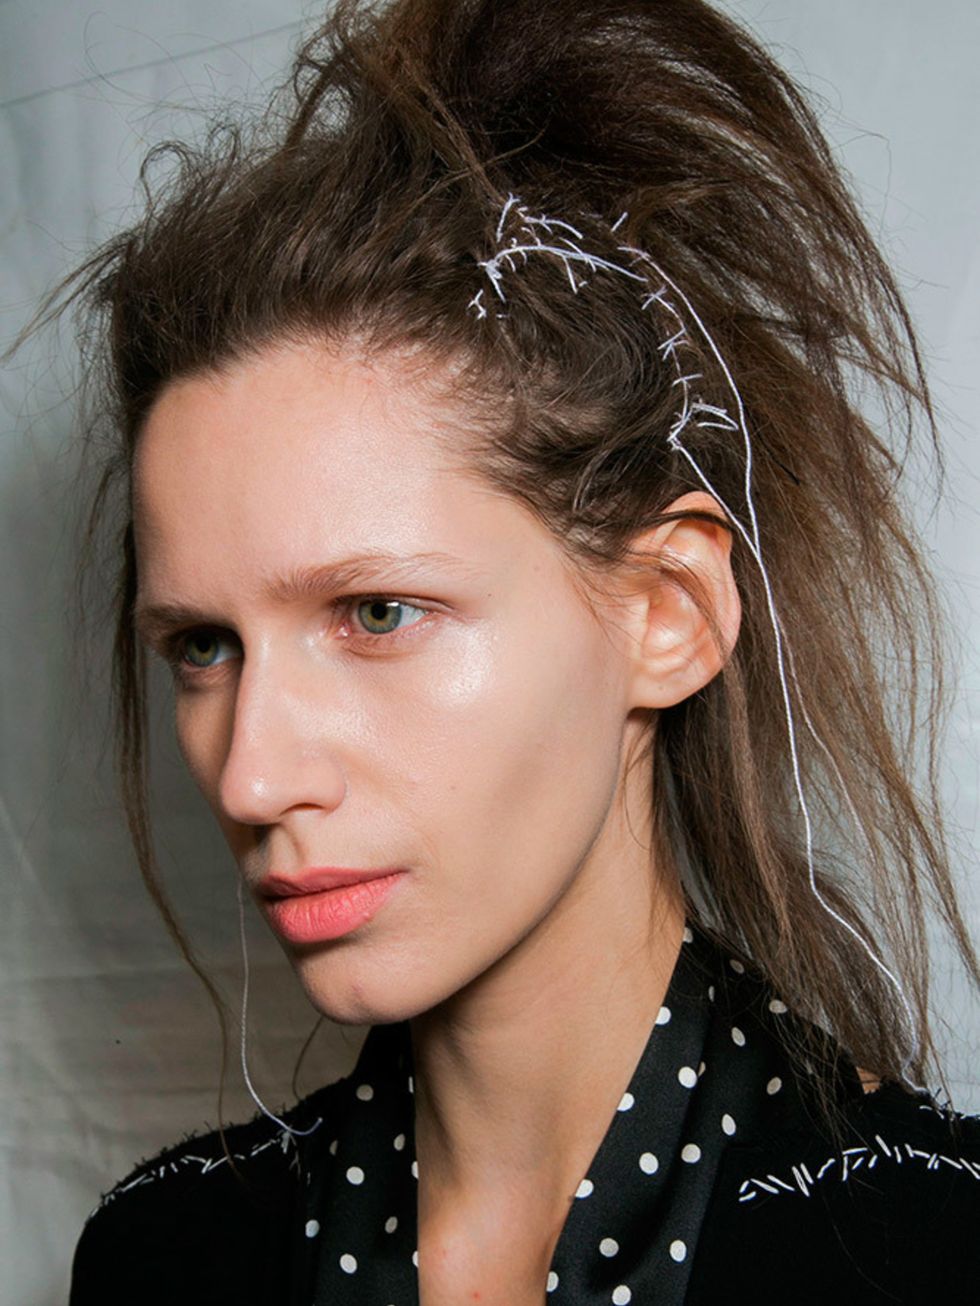 <p><a href="http://www.elleuk.com/catwalk/haider-ackermann/autumn-winter-2015"><strong>Haider Ackermann</strong></a></p>

<p>The look: Romantic punk</p>

<p>Hair stylist: Kamo for Aveda</p>

<p>Key products: Aveda Phomollient Styling Foam</p>

<p>Top tip: